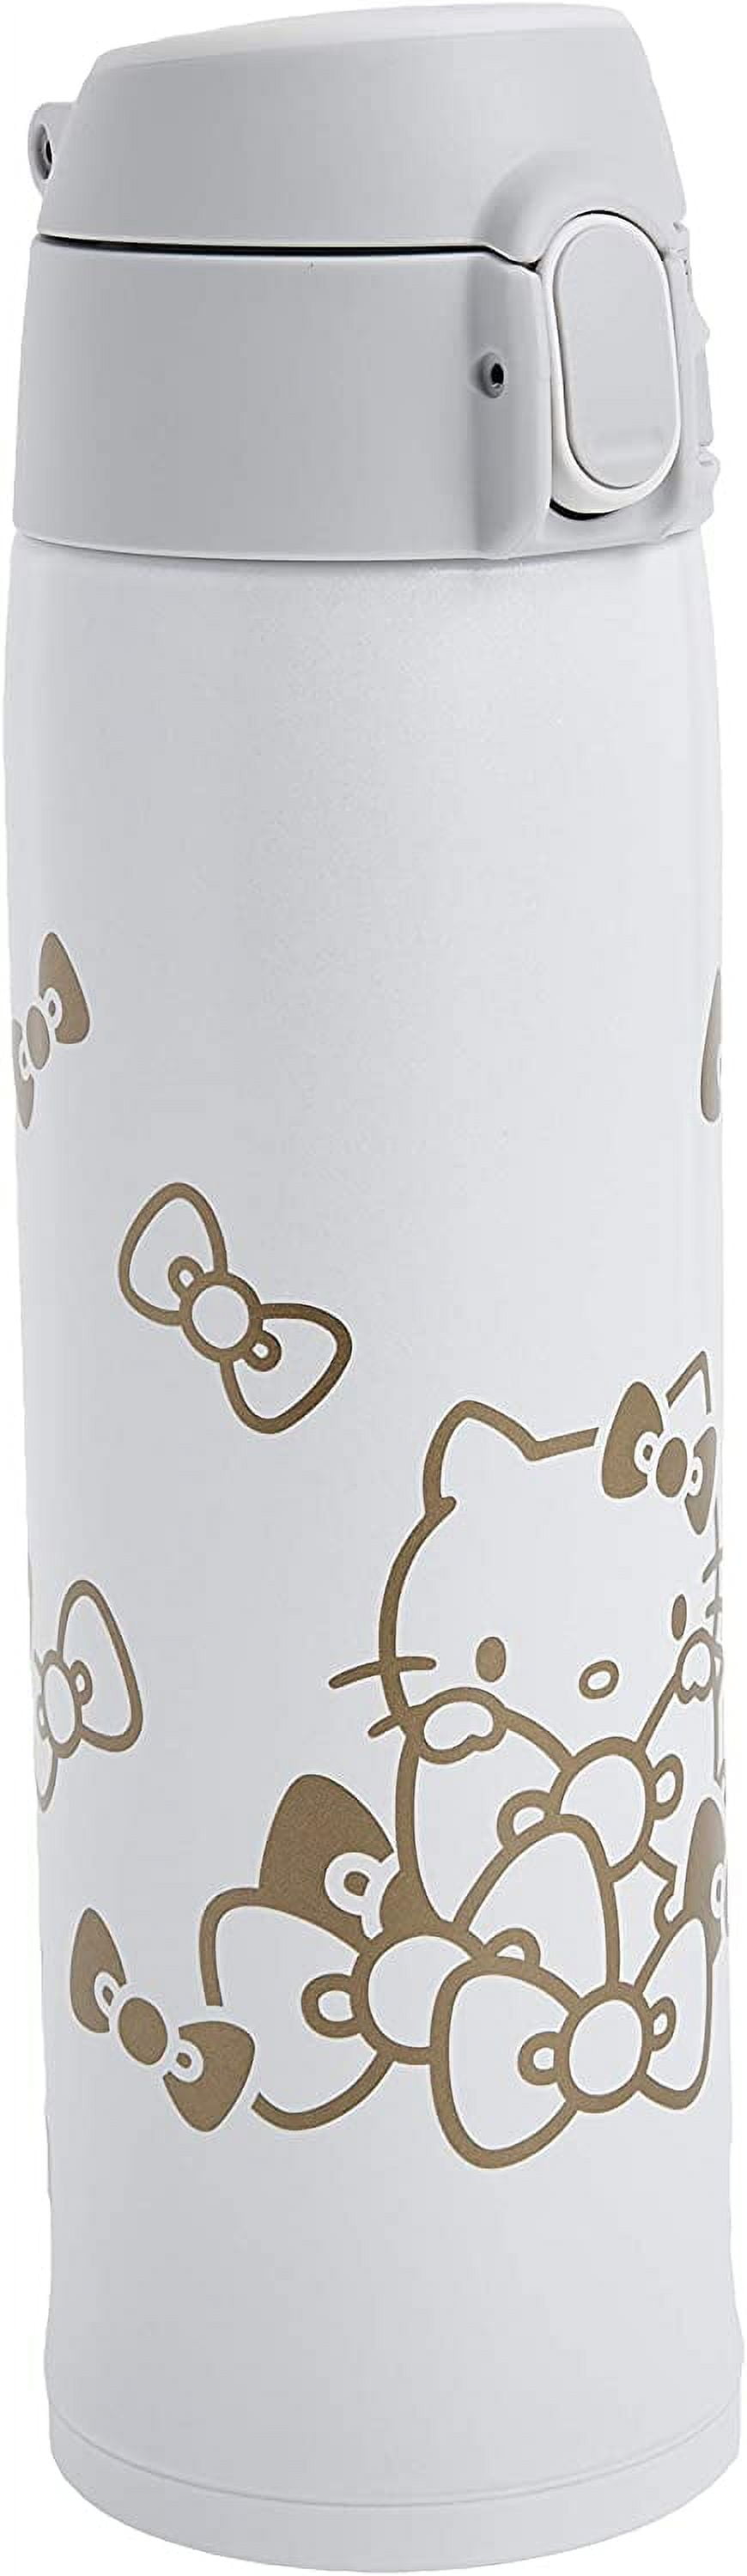 Zojirushi NS-RPC10KTWA Automatic Rice Cooker & Warmer, 5.5-Cup, White &  SW-EAE50KTBA Stainless Steel Food Jar, 17-Ounce, Hello Kitty Collection  Black